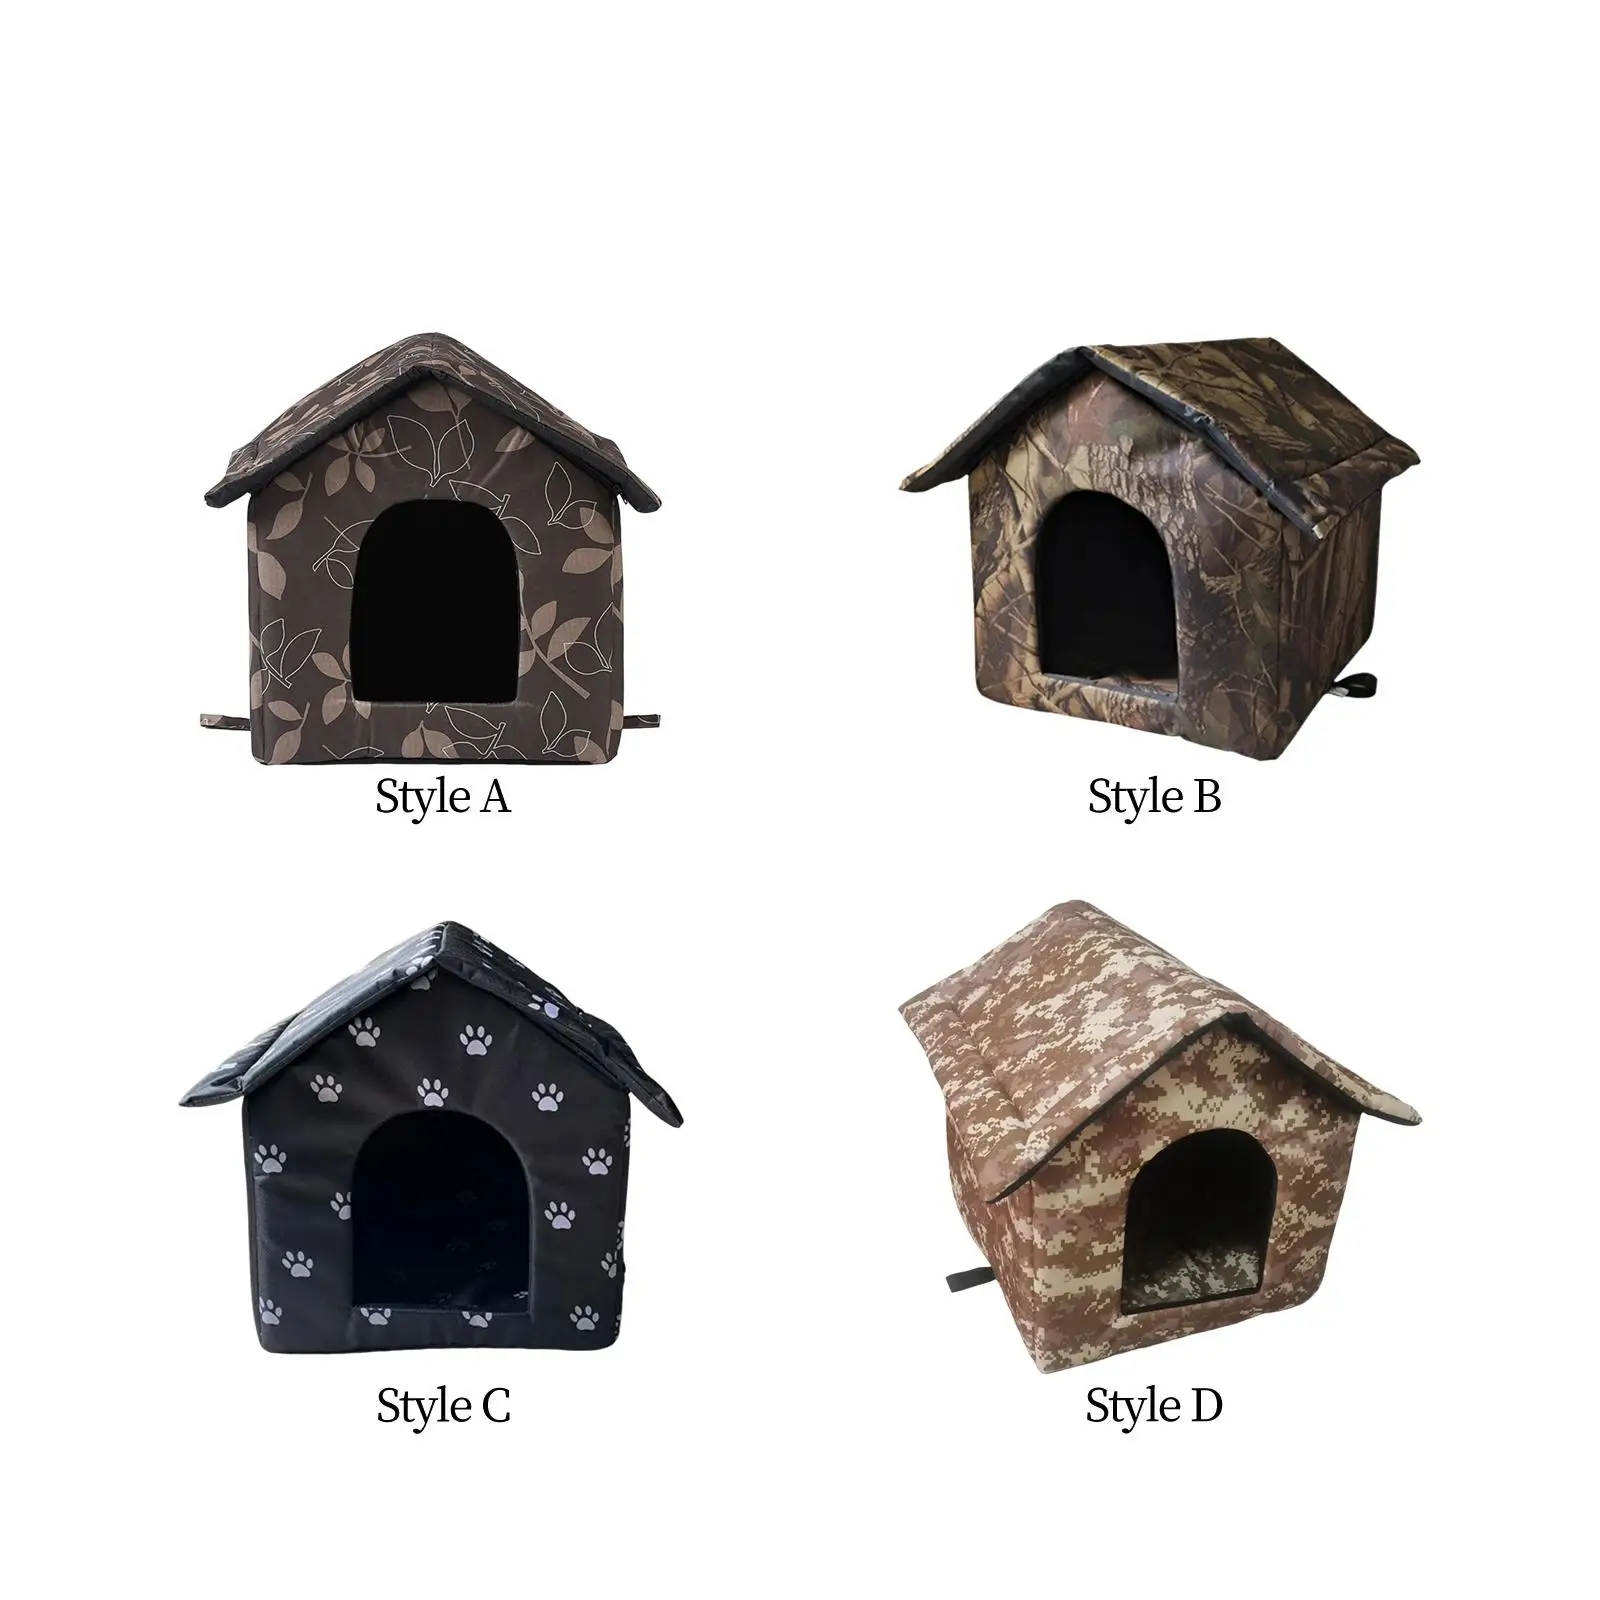 Cute Waterproof Kittens Cat Bed Pet Tent Cave for Garages, Porches, Barns, Balconies, Corridors with Sponge Lining Weatherproof